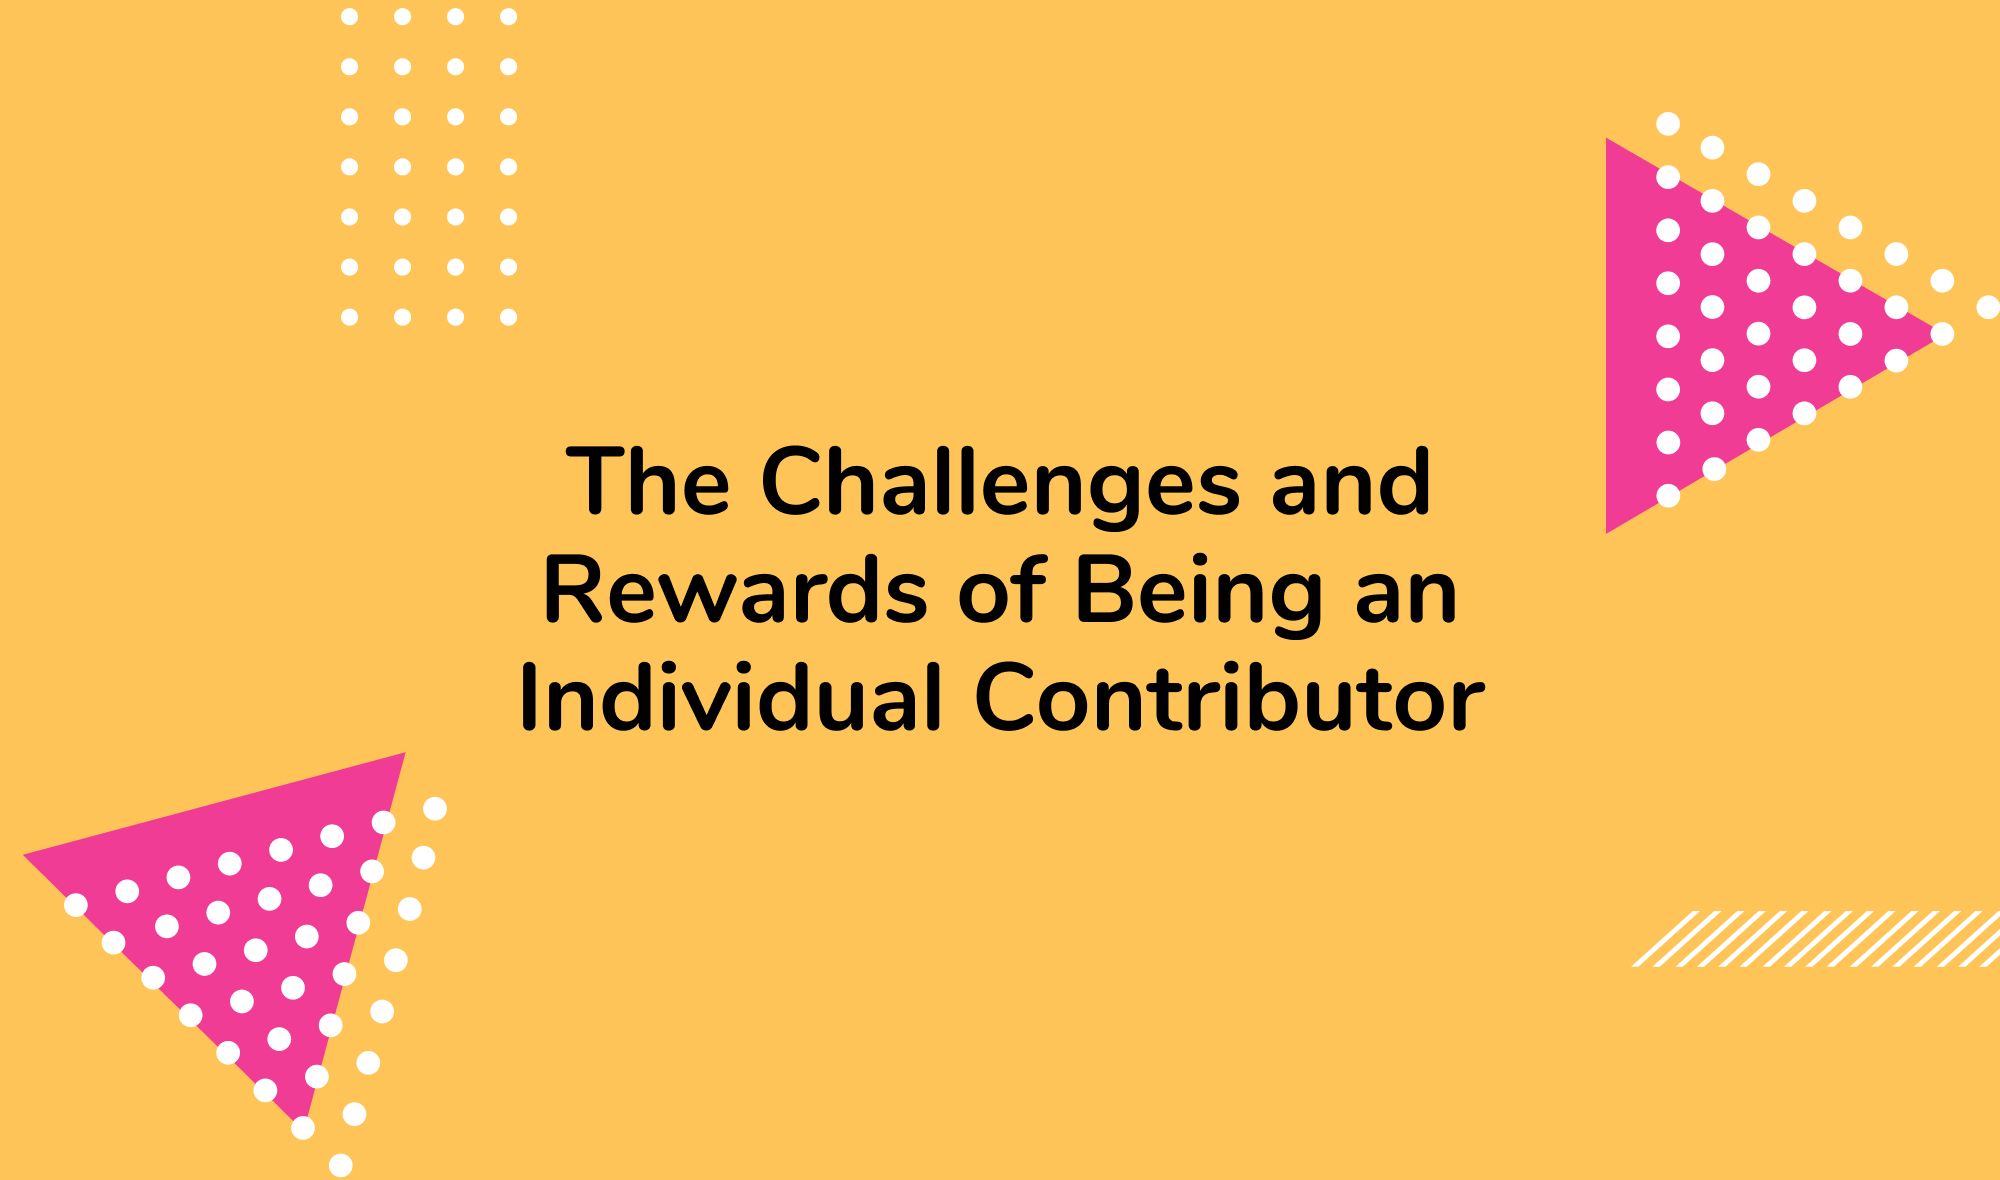 The Challenges and Rewards of Being an Individual Contributor